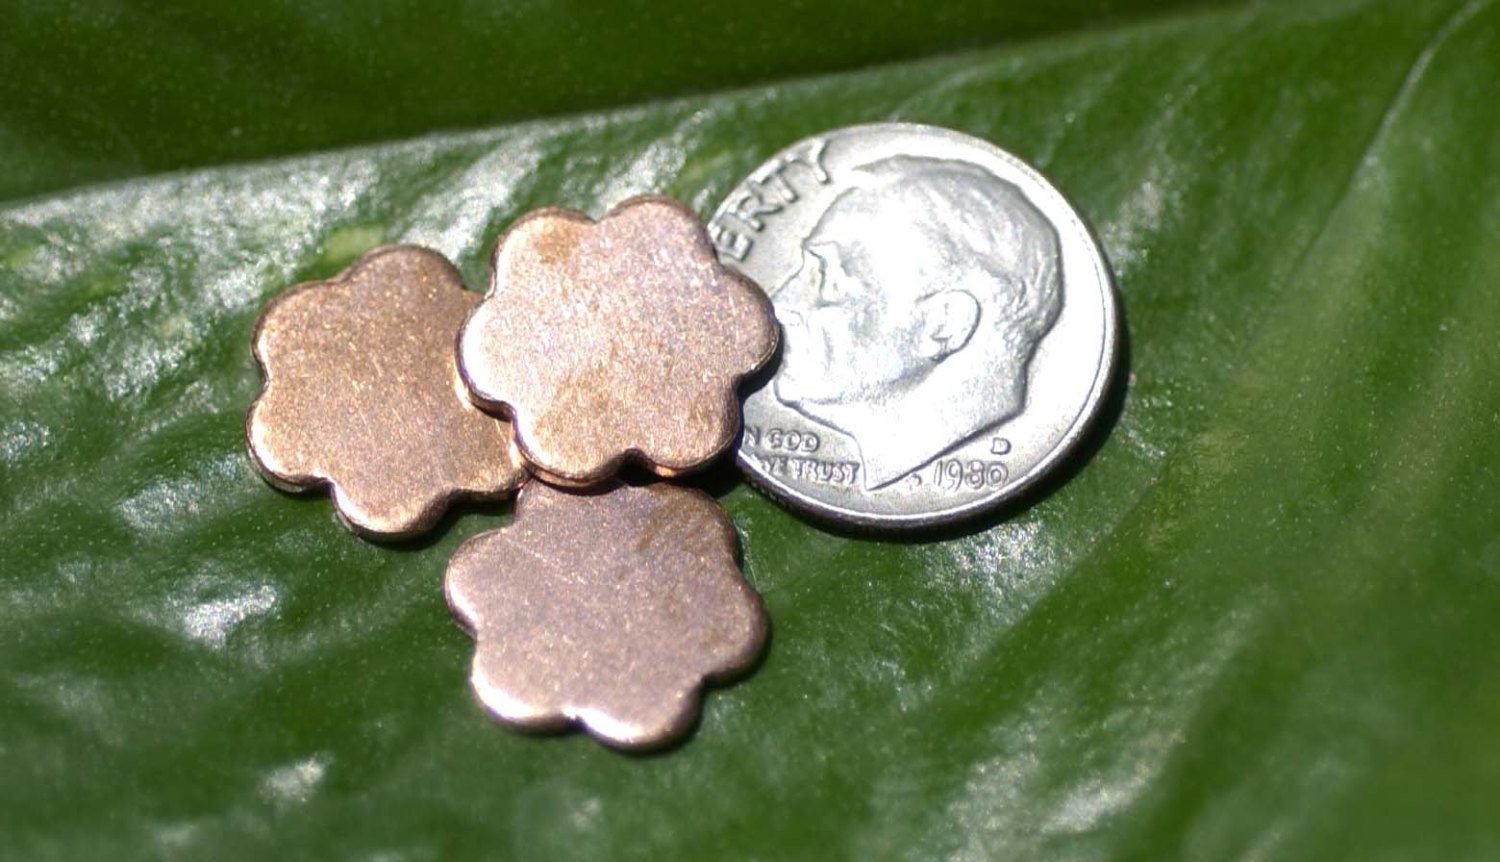 Tiny Flower Blank 13mm for Blanks Metalworking Stamping Texturing - 8 pieces